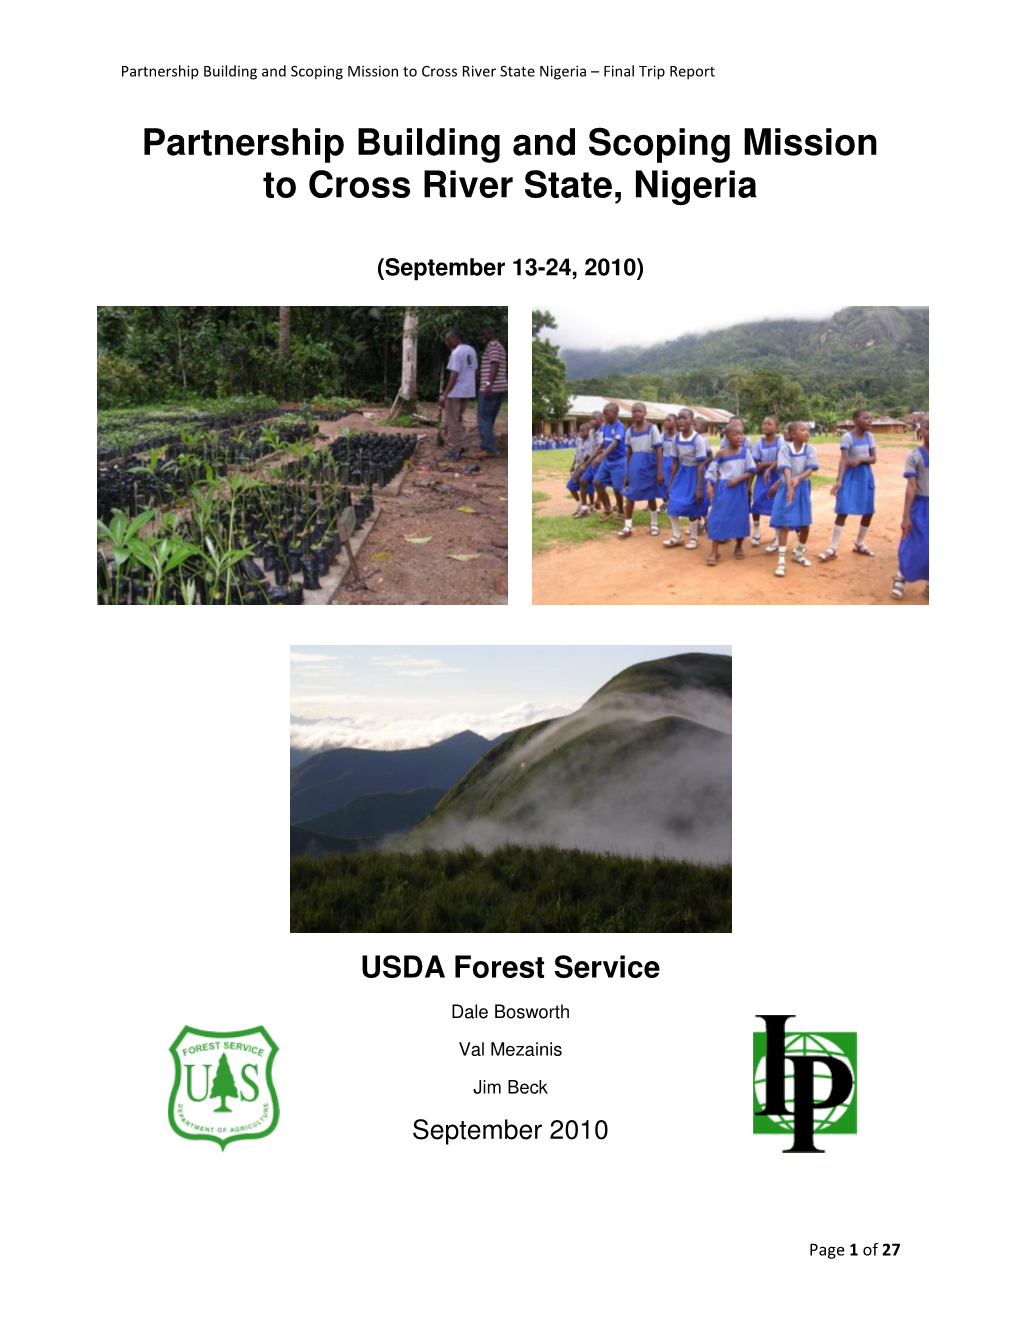 Partnership Building and Scoping Mission to Cross River State, Nigeria